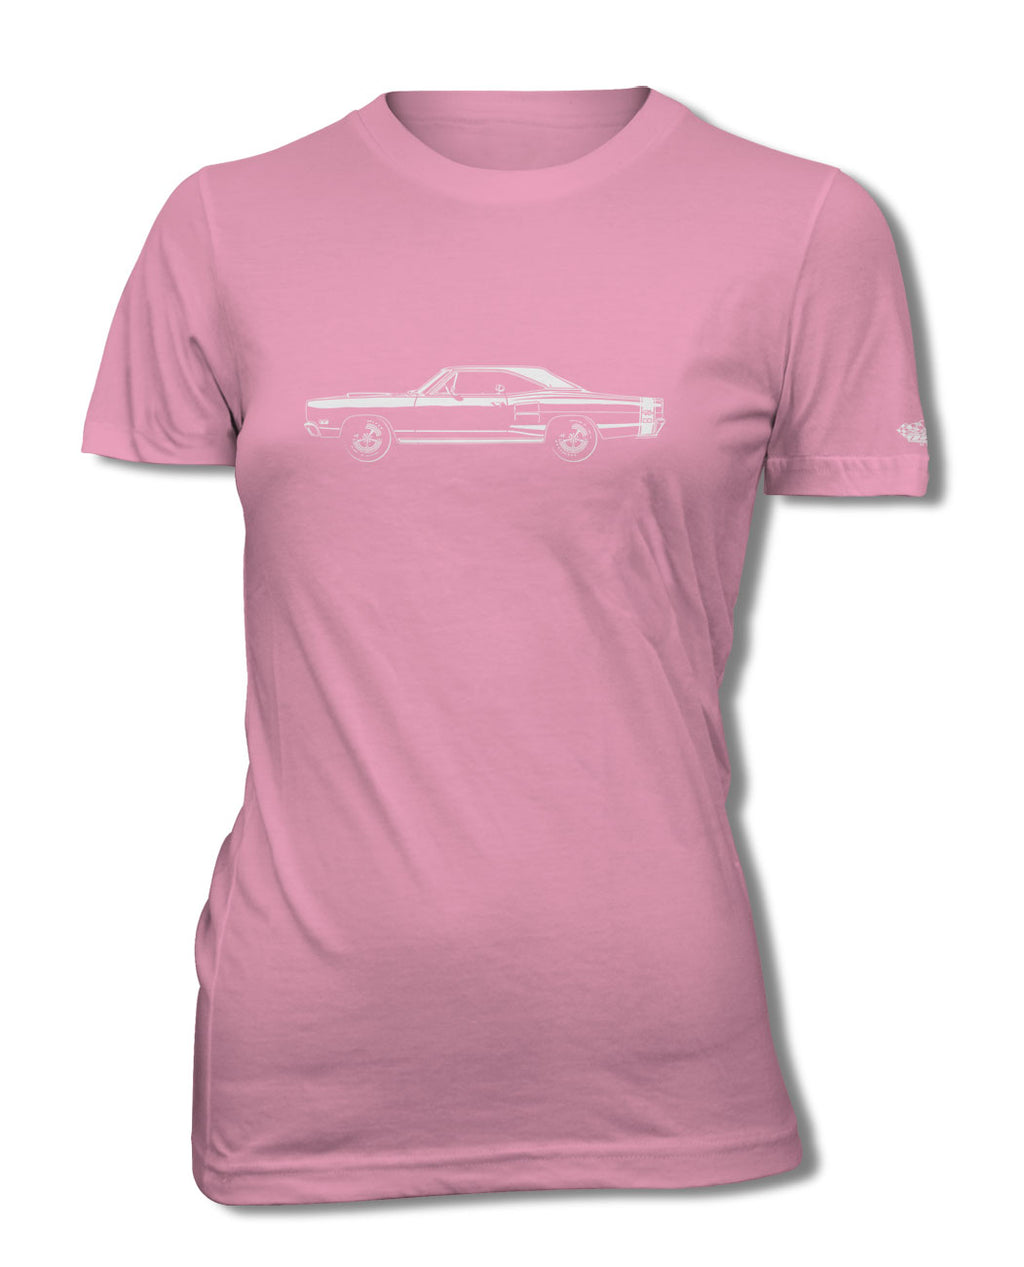 1969 Dodge Coronet RT Hardtop with Stripes T-Shirt - Women - Side View